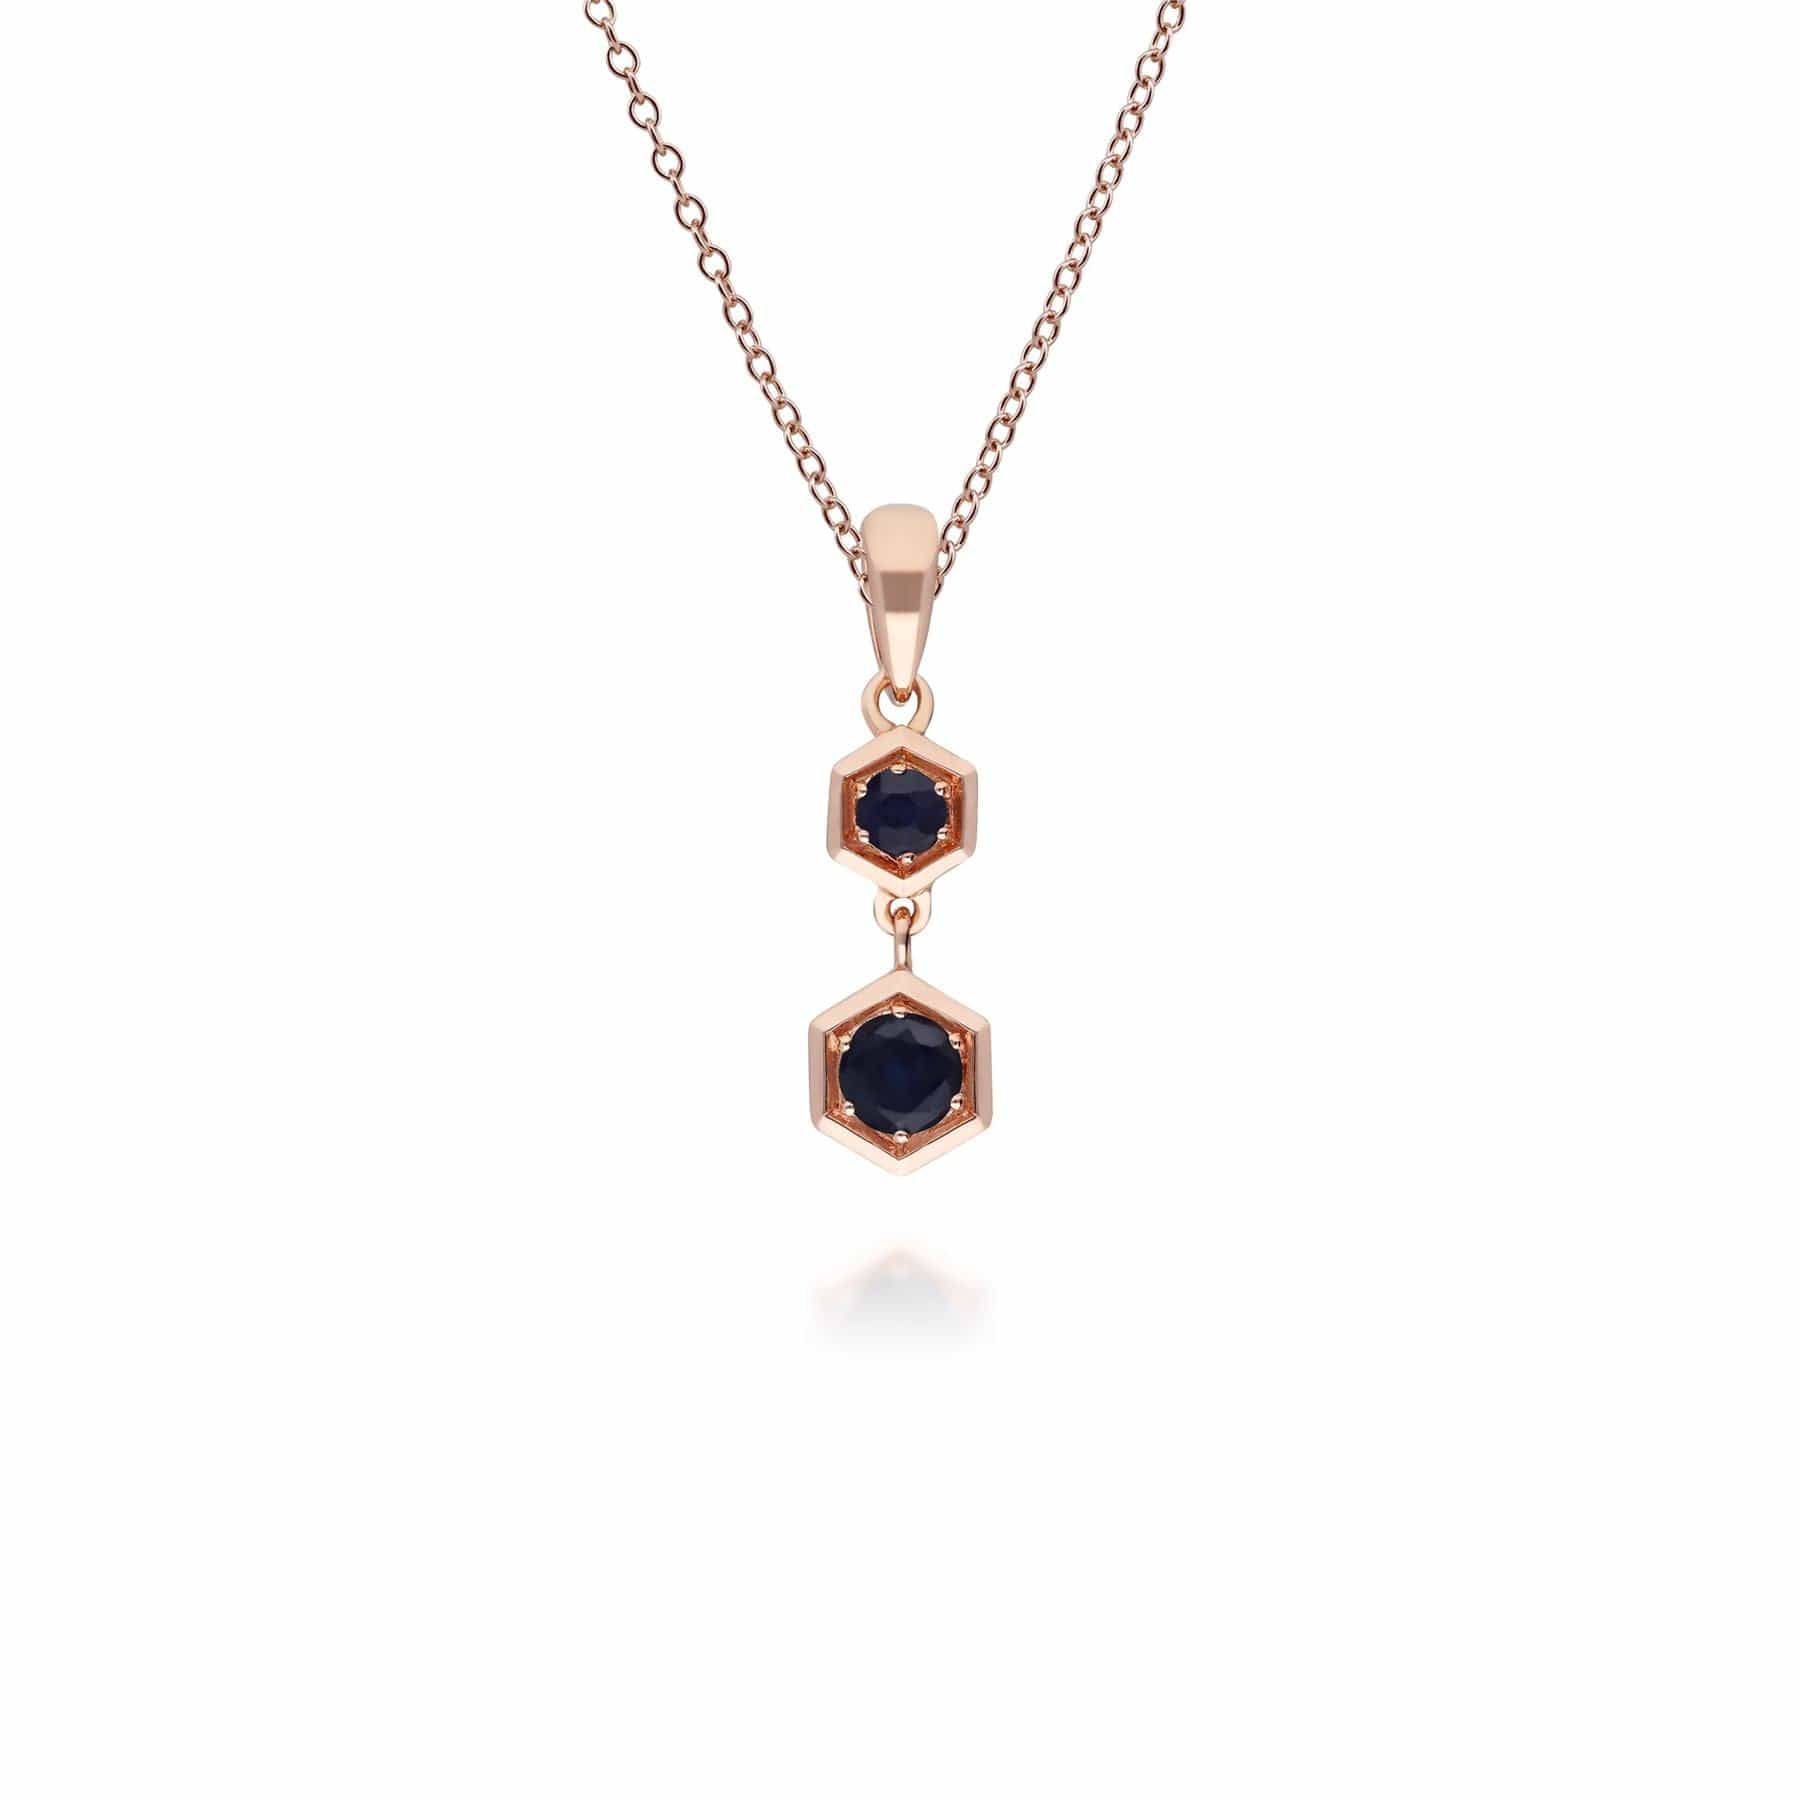 Gemondo Honeycomb Inspired Sapphire Pendant Necklace in 9ct Rose Gold